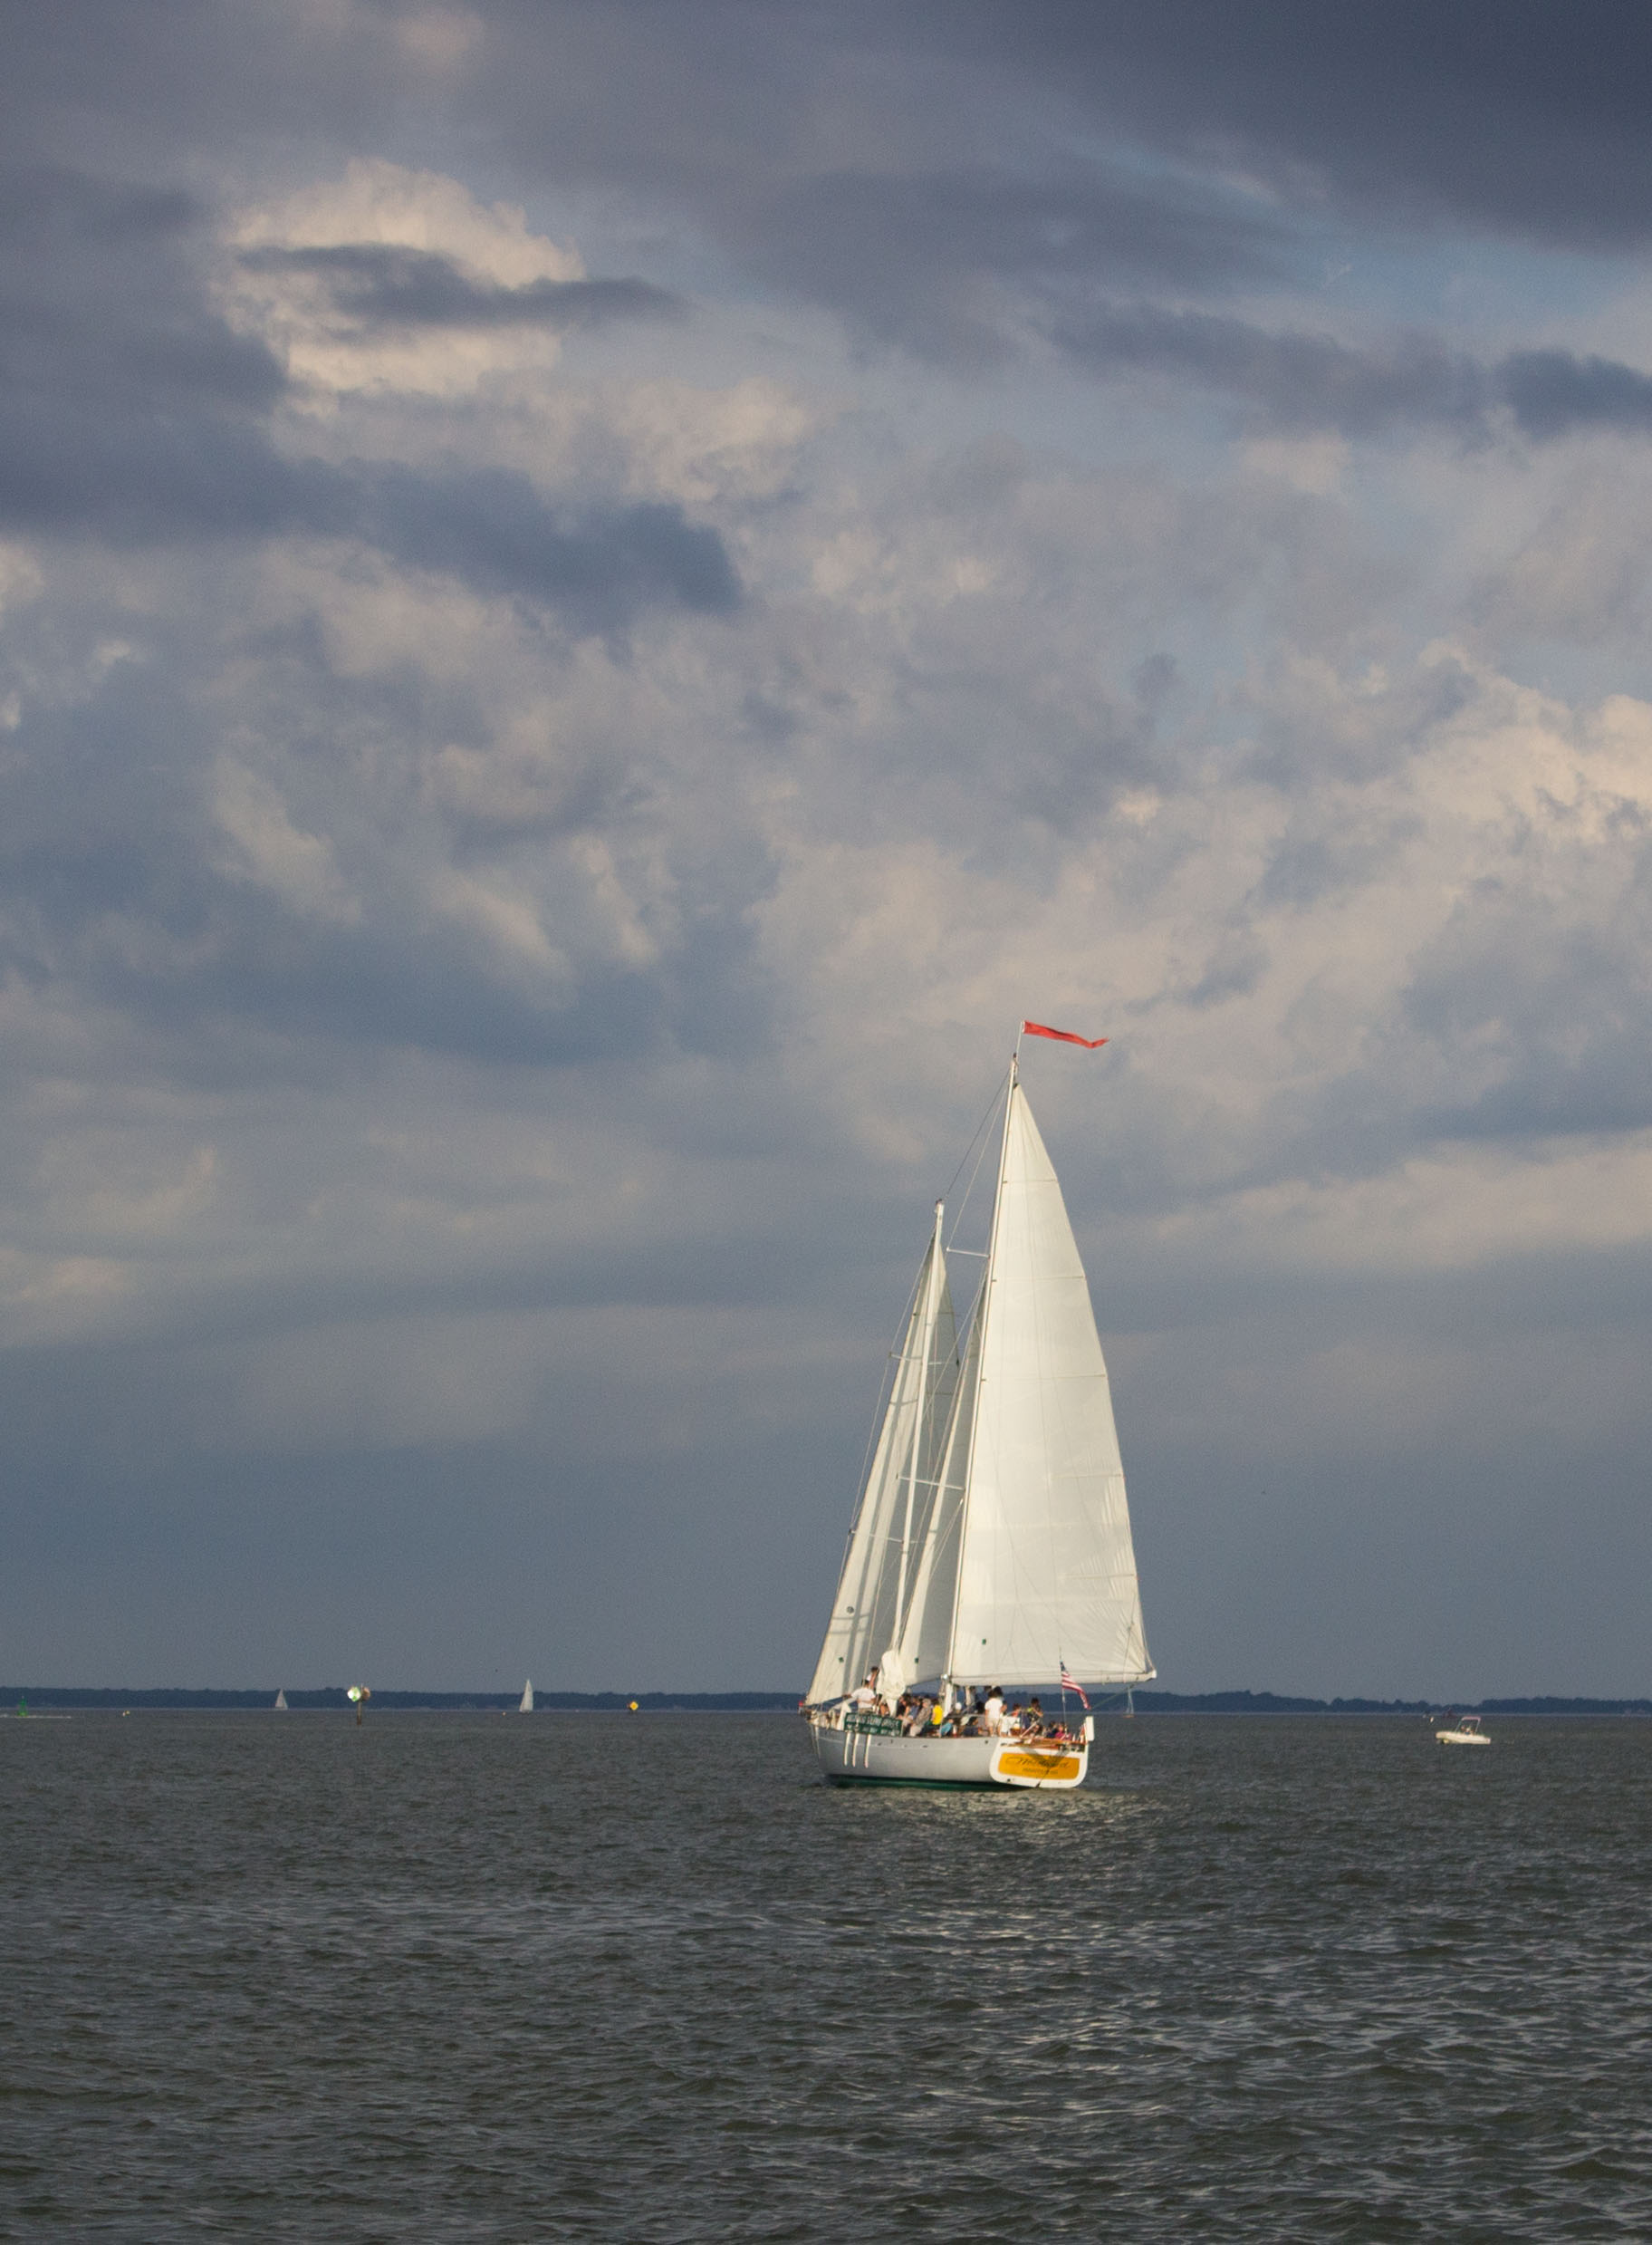 Full shot of the schooner under full sail on a cloudy day